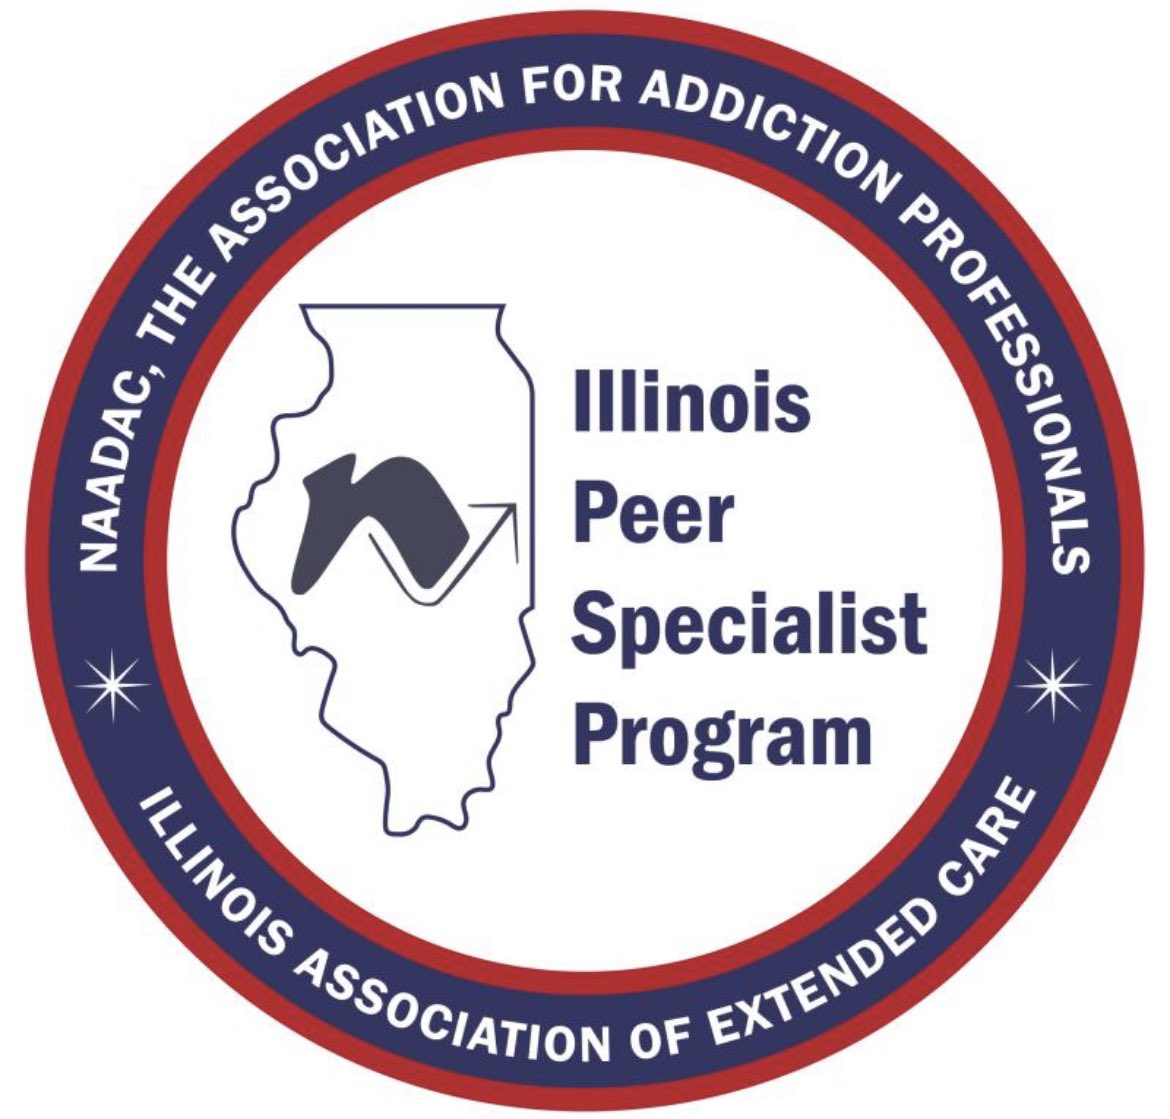 I'm very excited about this new partnership and program - Illinois Peer Specialist Program! I'm grateful for the opportunity to serve the Illinois peer support workforce. 

Learn more about this program at lnkd.in/gvwPirve 

#illinois #peersupport #naadac #peerworkforce